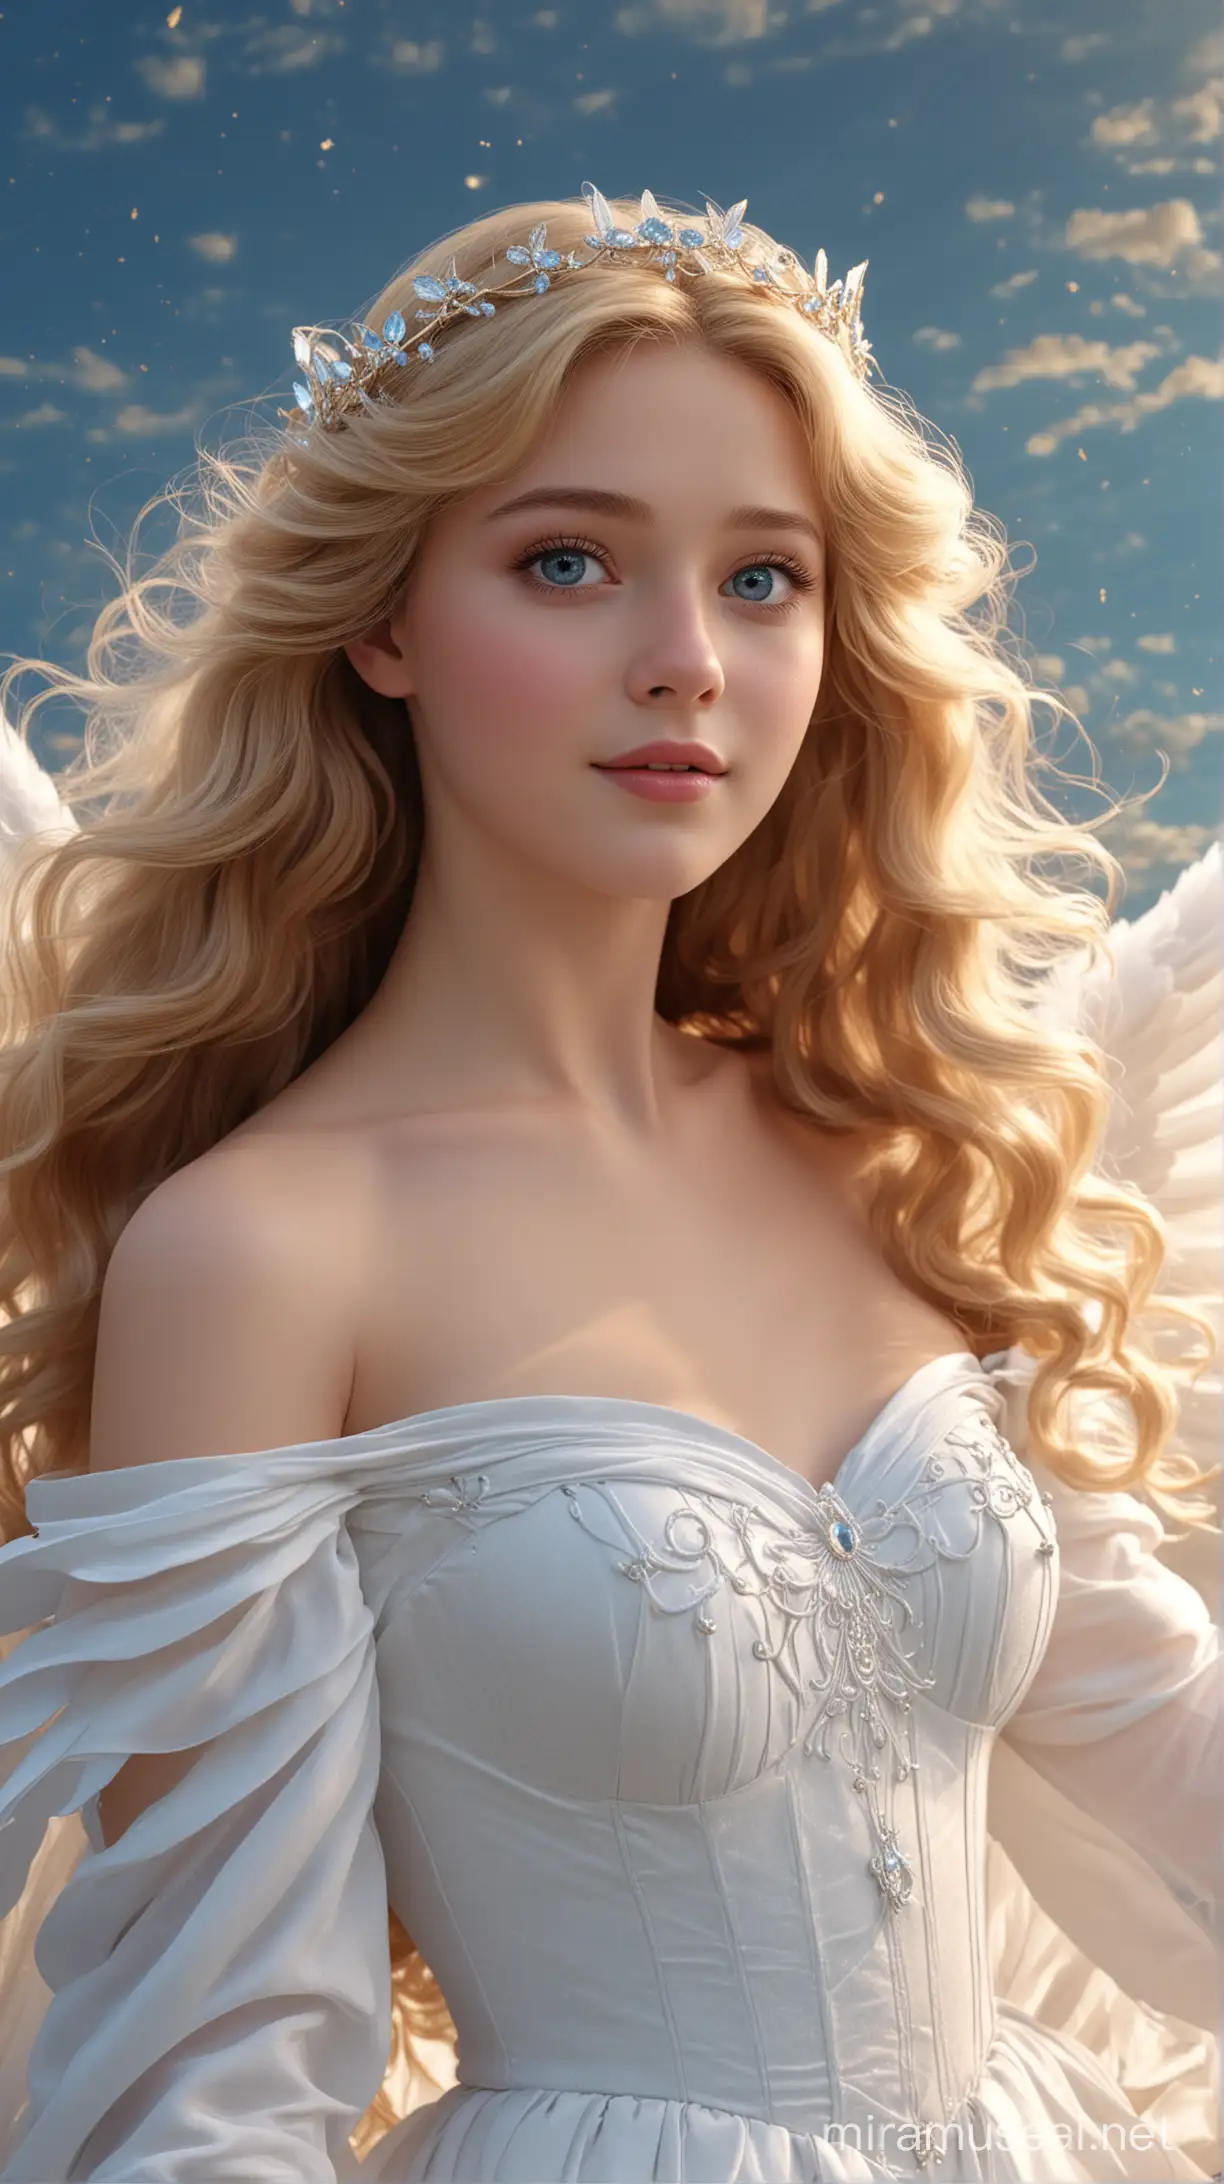 in the sky natural background an angel flies to heaven  there are disney princess Aurora France 18-years and 
long wavy blonde hair with bangs and blue eyes and celestial white dress and with large white angel wings face beautiful 8k re solution ultra-realisti